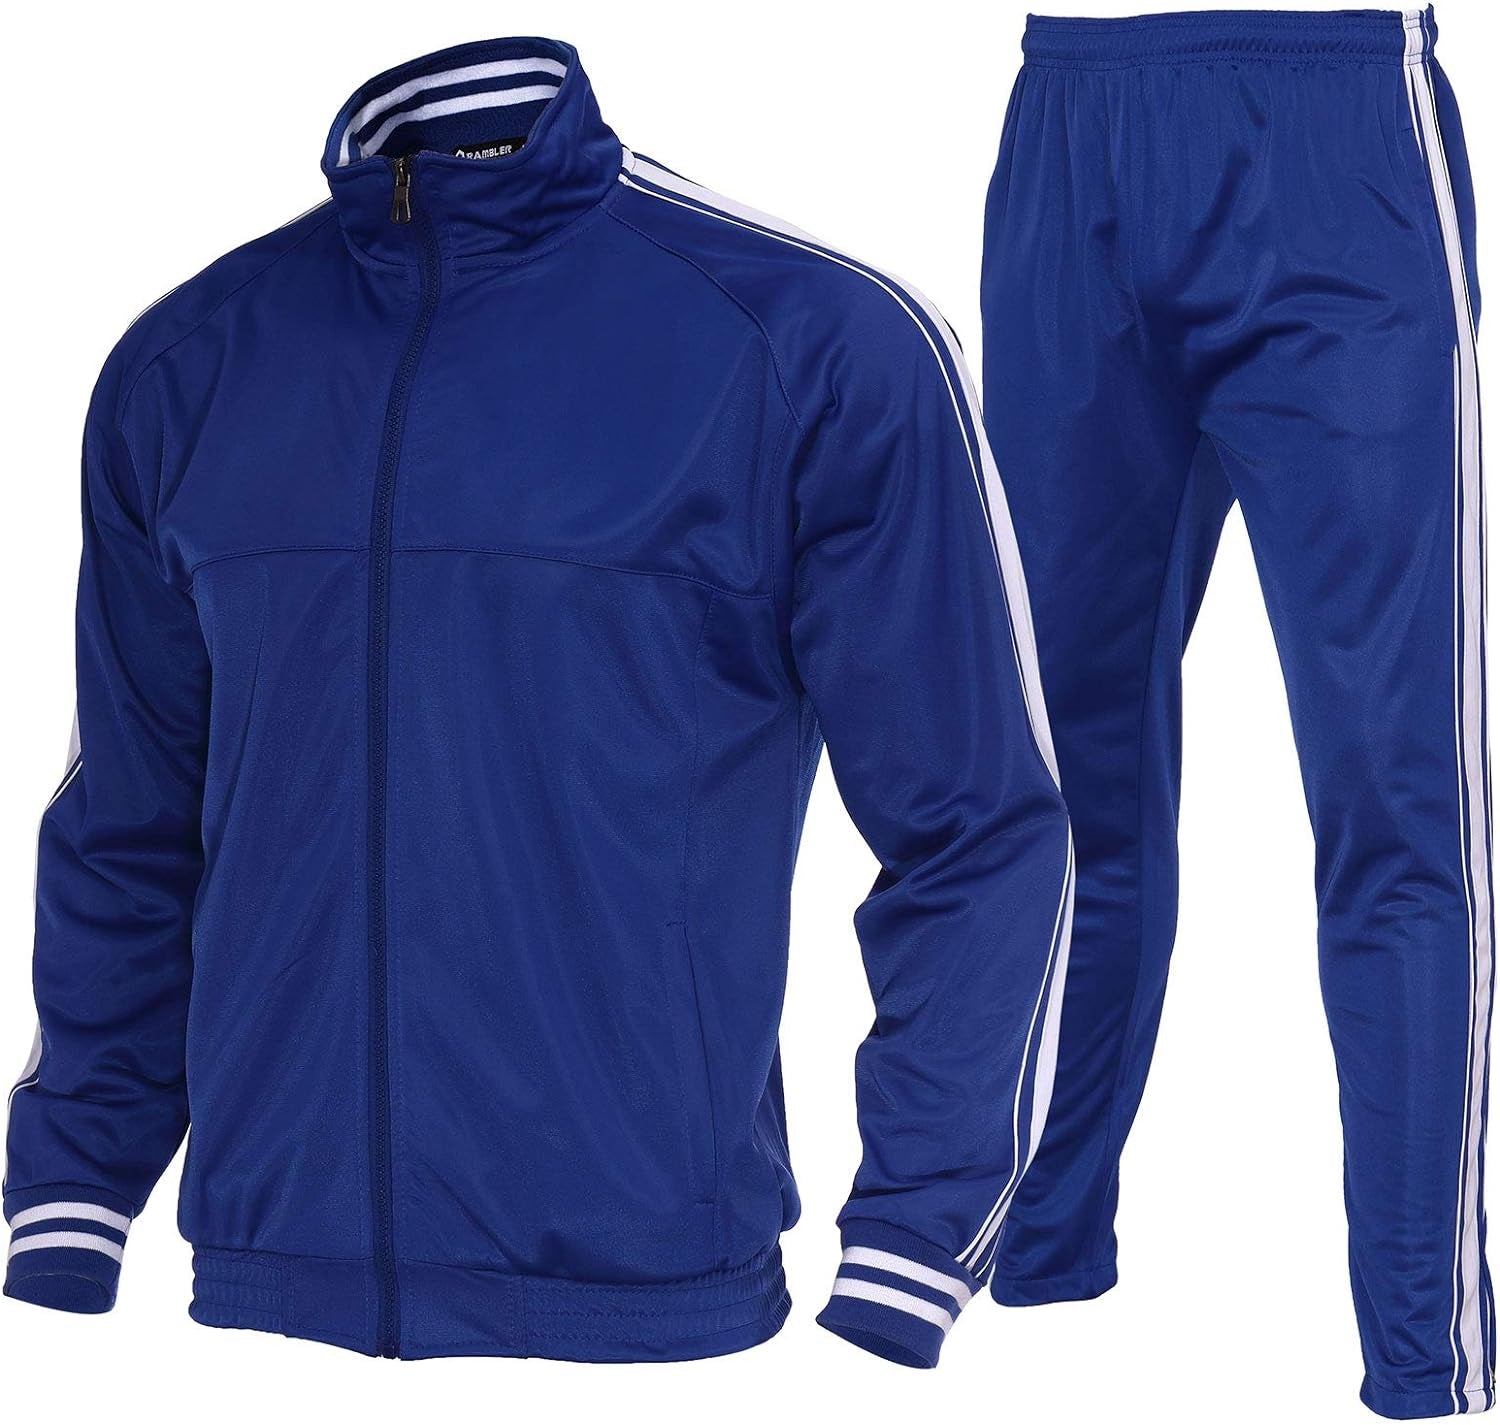 Mens Sweatsuits 2 Piece Casual Athletic Long Sleeve Tracksuit Set Jogging Suit for Running,Exercise,Traning